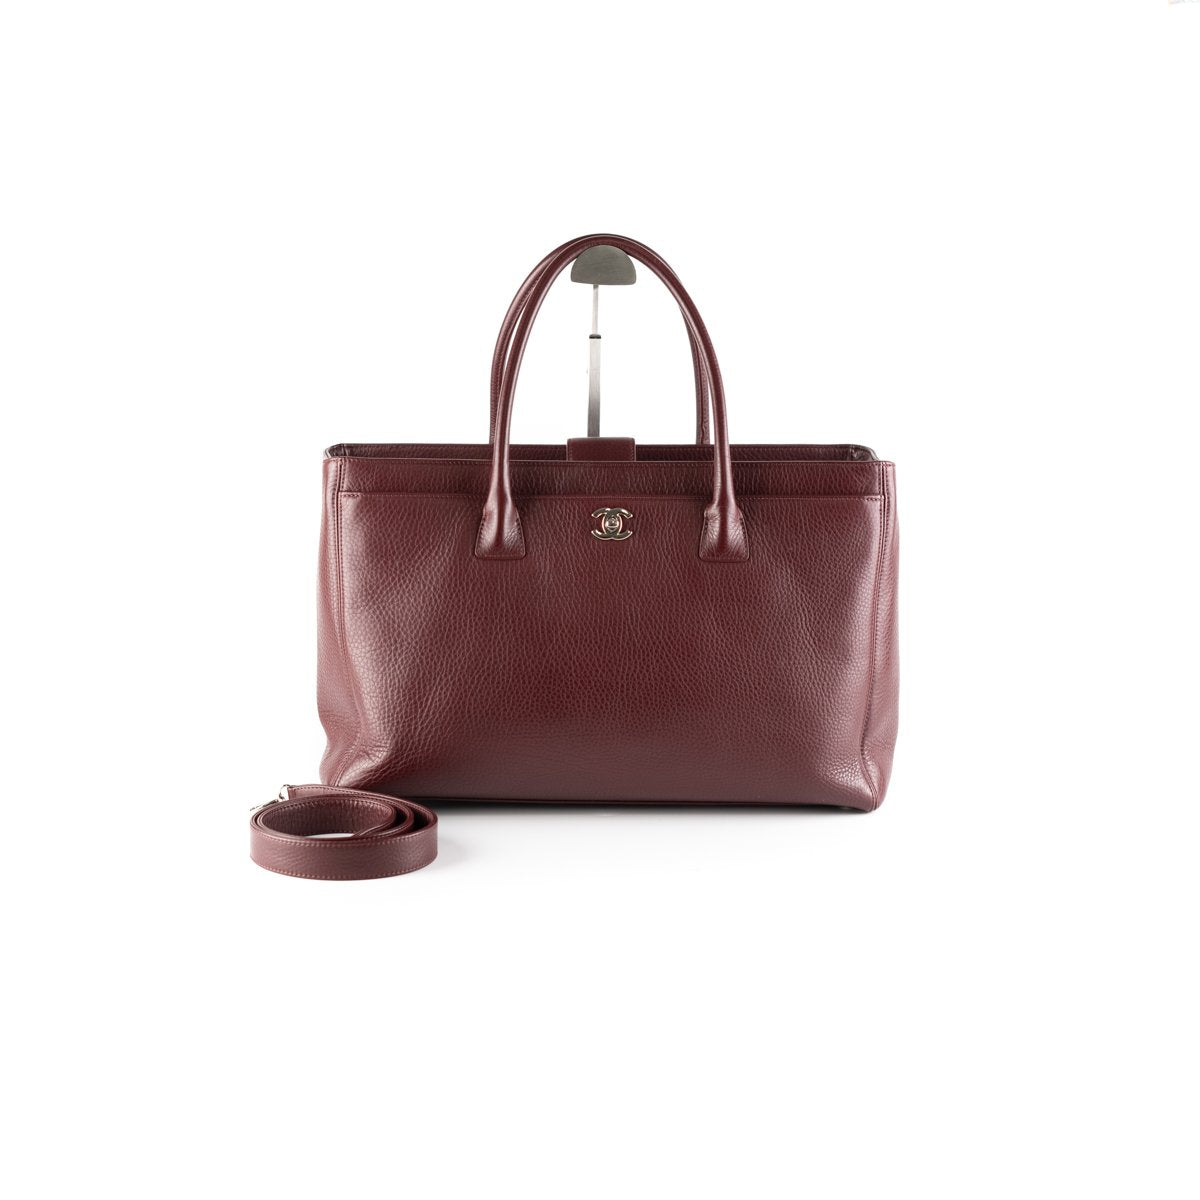 Chanel Cerf Tote Large Bag Burgandy - THE PURSE AFFAIR